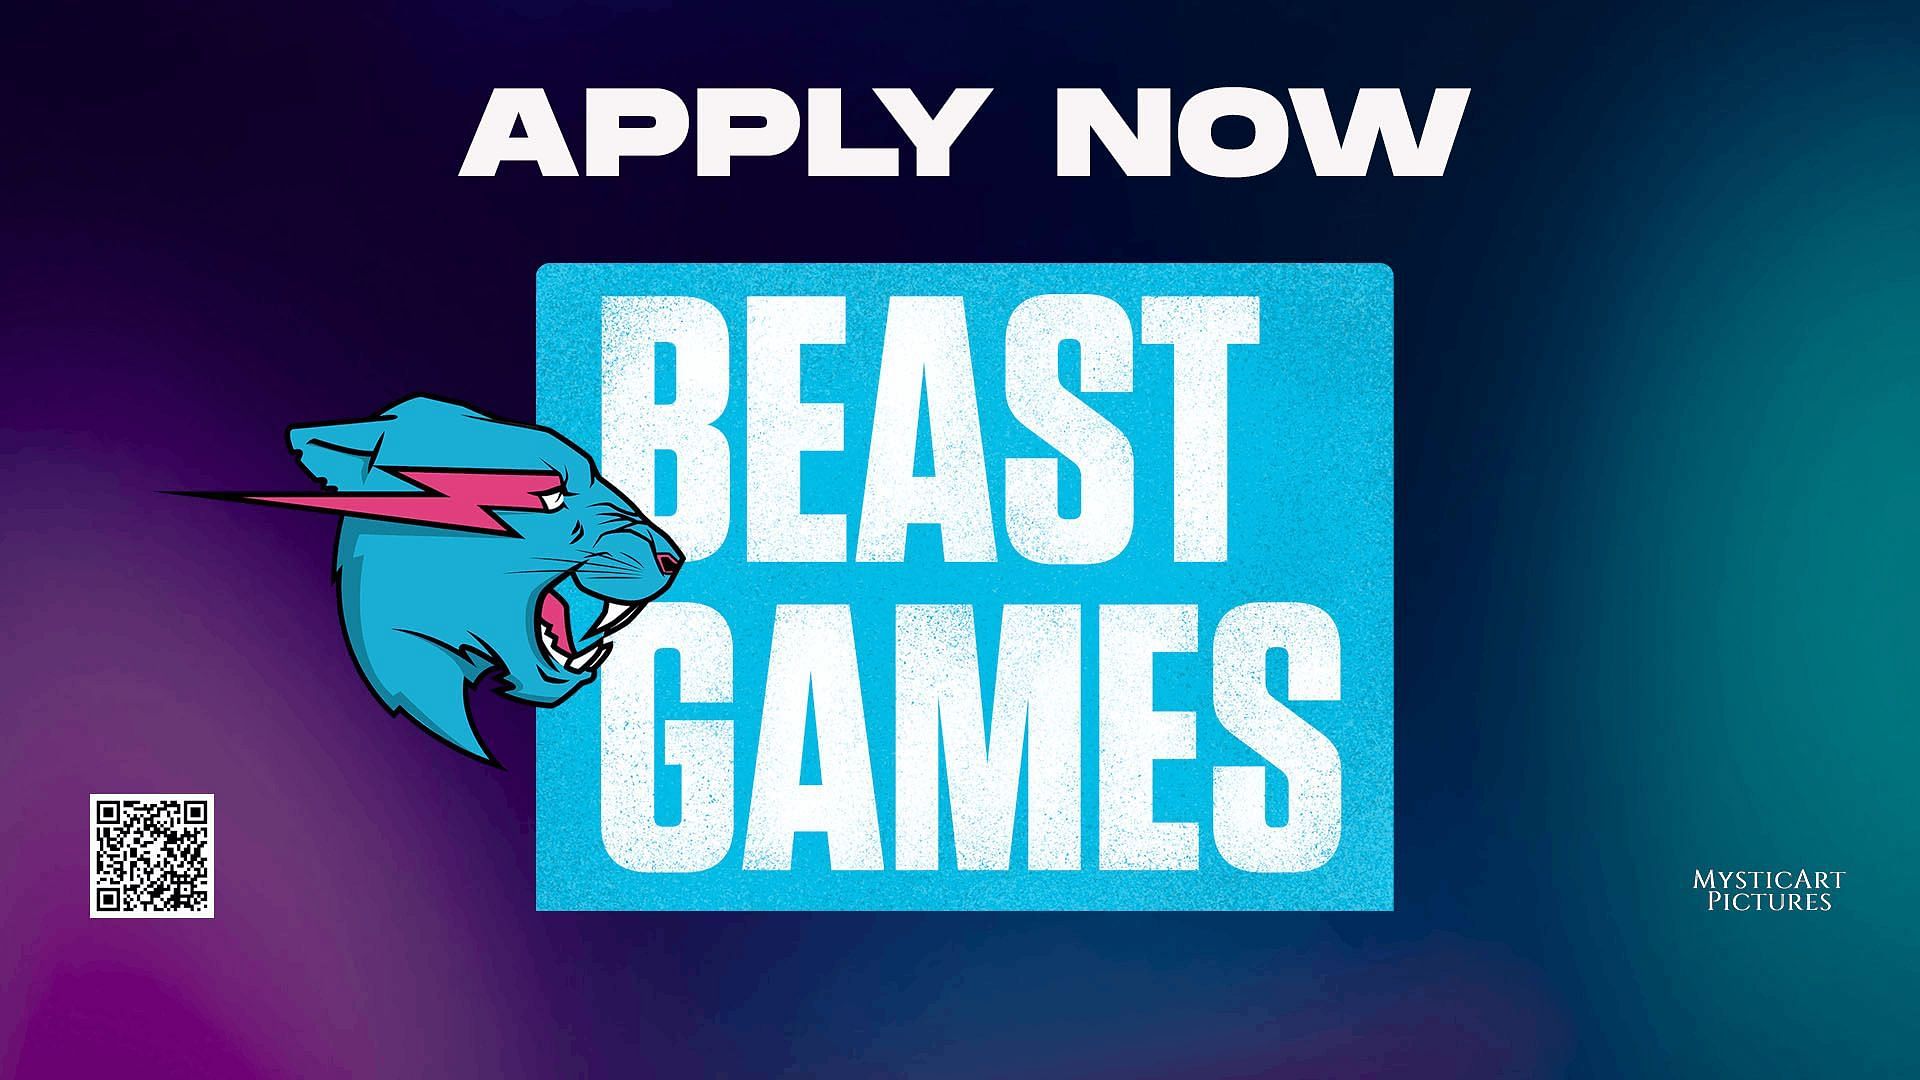 Interested candidates can apply through the official website (Image via beastgames.com)